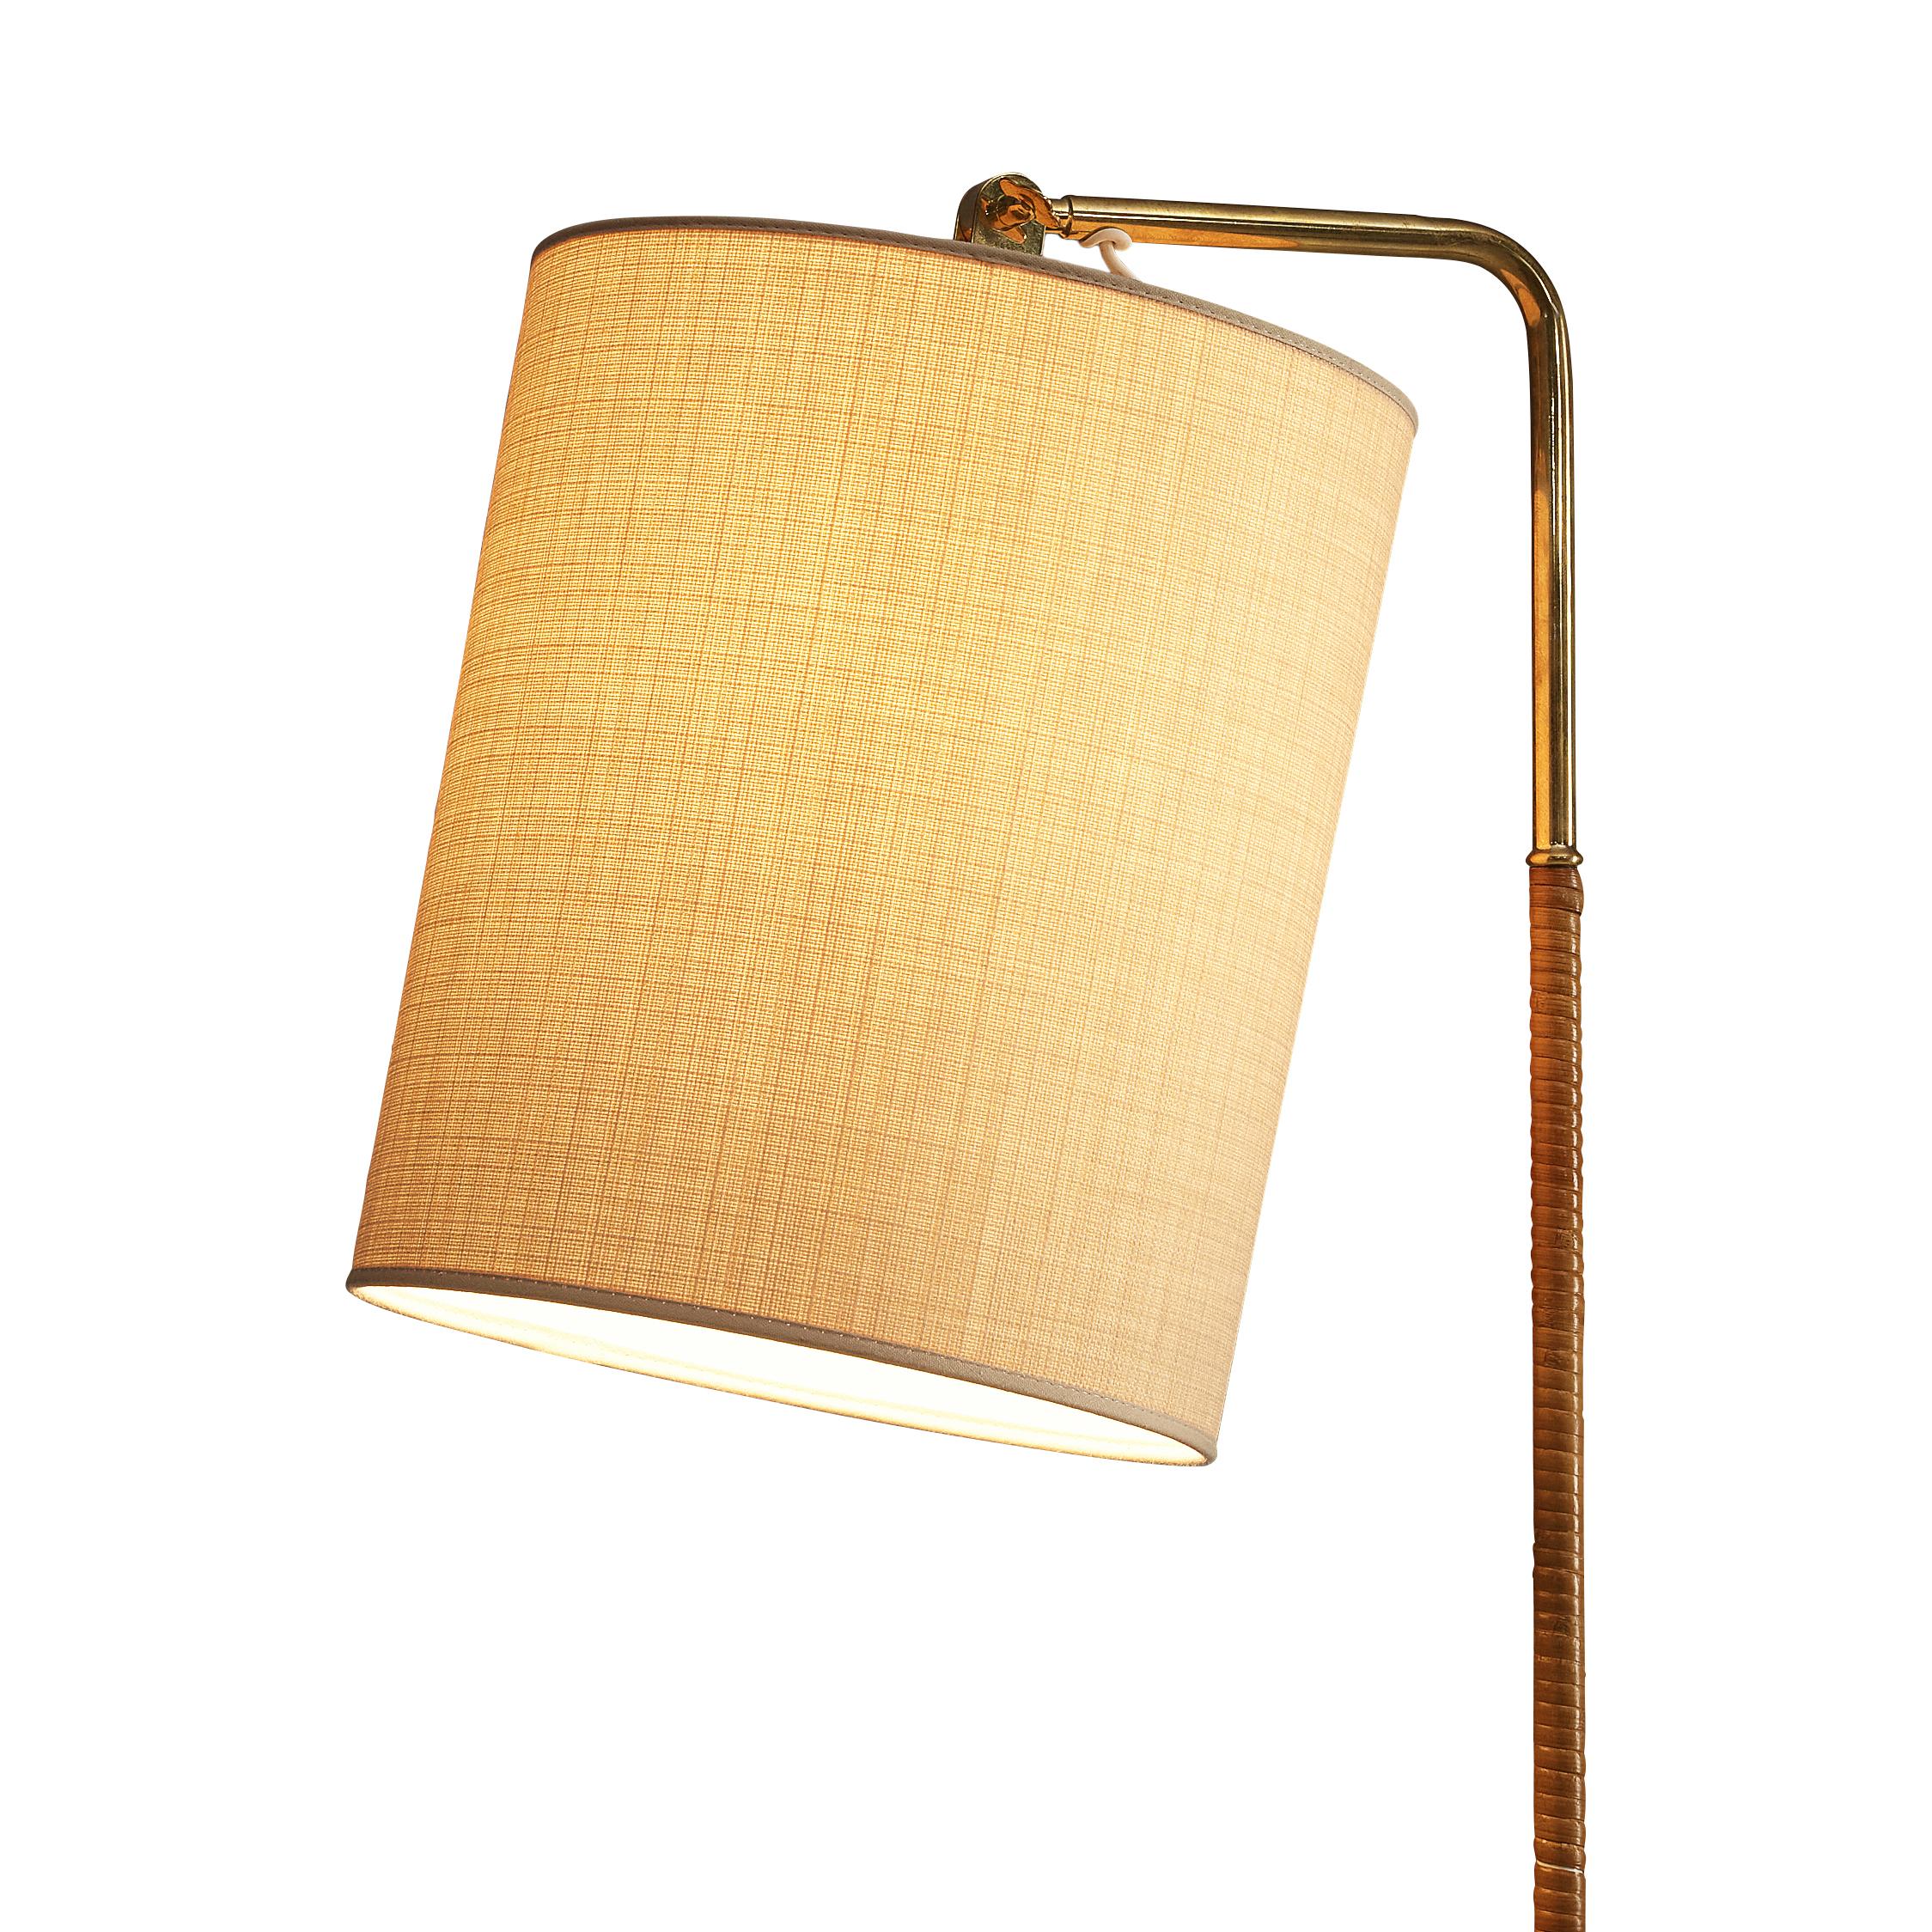 Paavo Tynell for Taito, floor lamp model 9631, brass, cane, cloth, Finland, 1950s

Elegant floor lamp by Finish master of lights Paavo Tynell. This admirable floor lamp stands on a delicate tripod in brass from which a thin stem with a cane surface